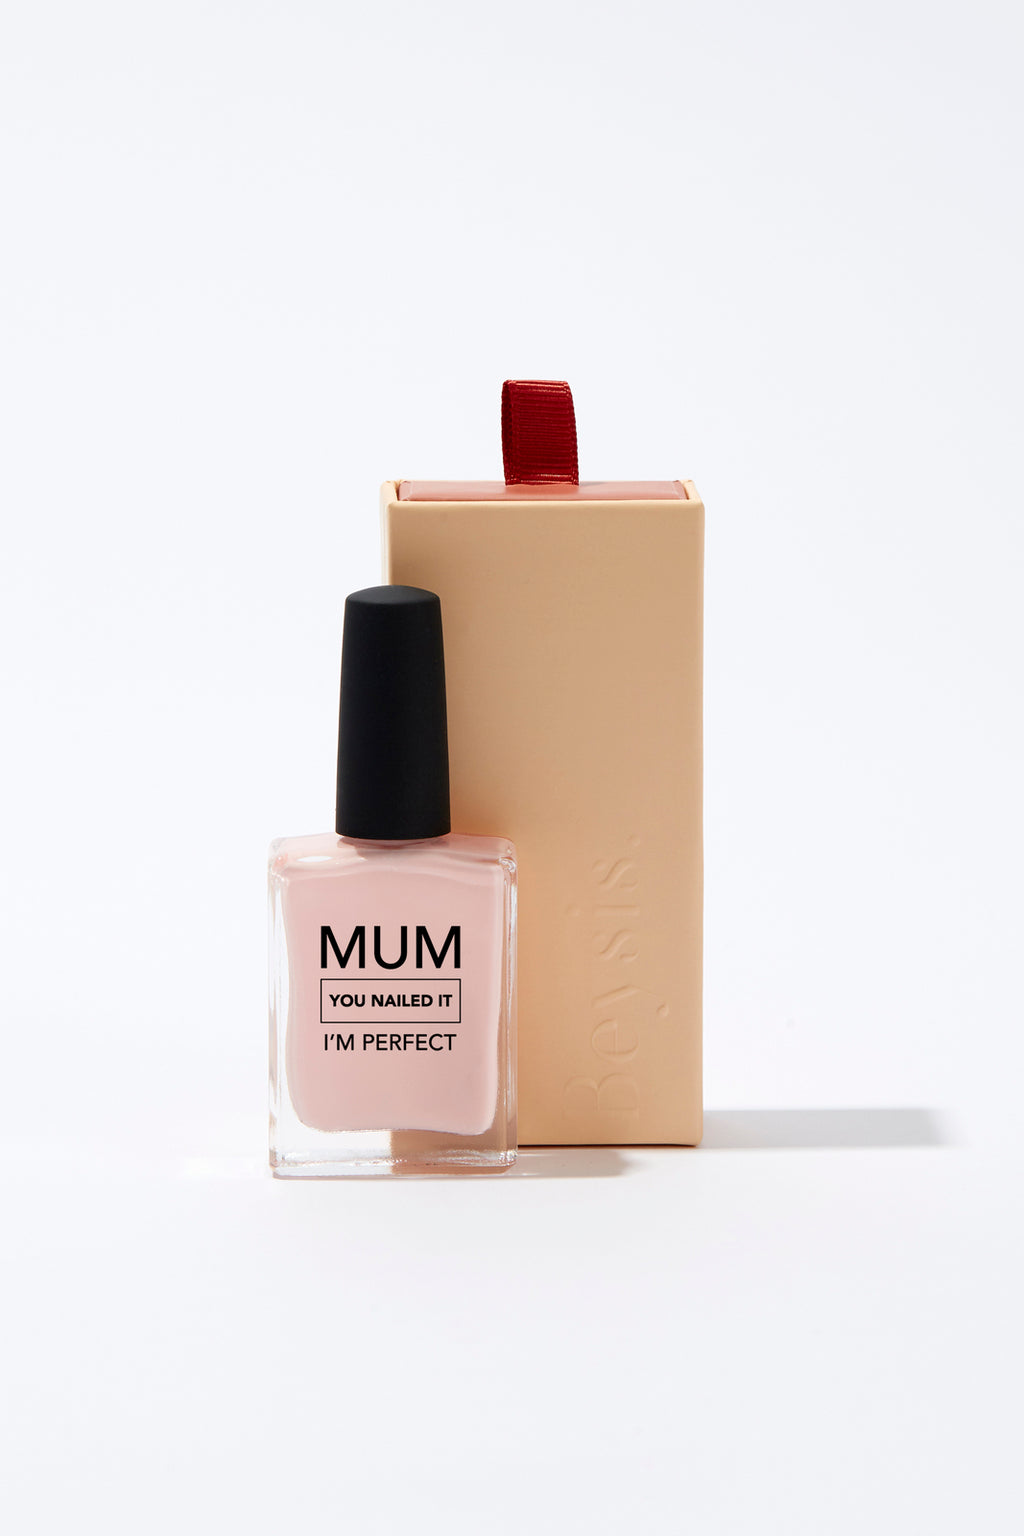 Mum You Nailed it - Nude Pink